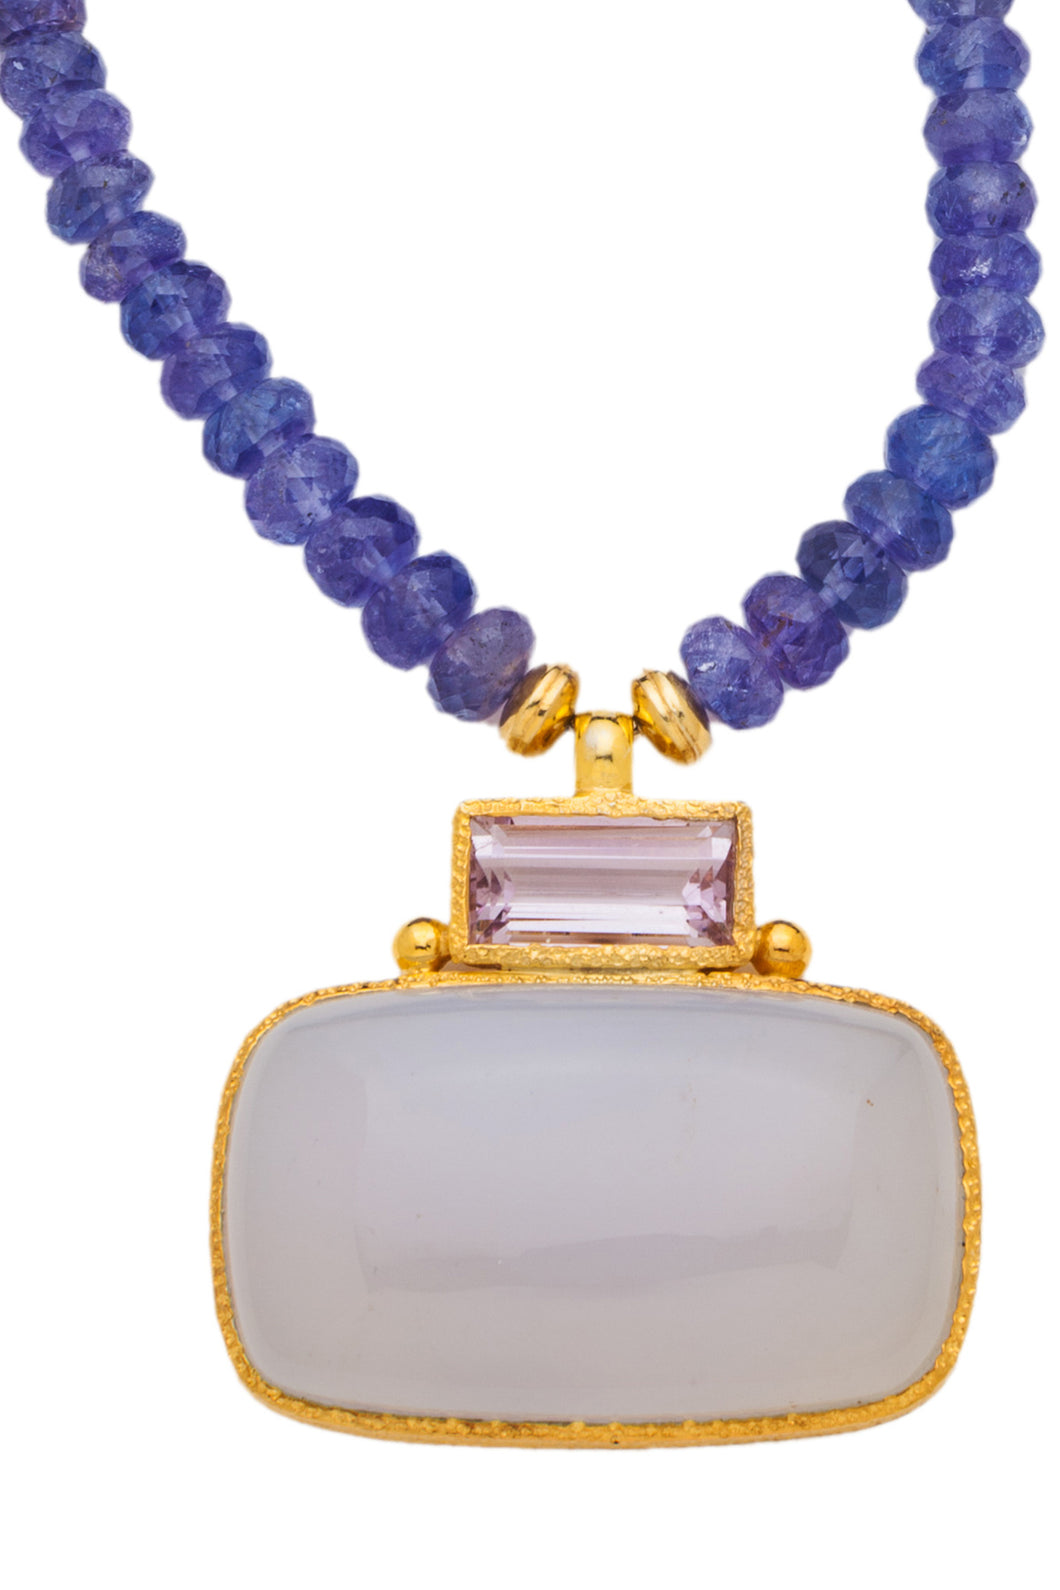 ONE OF A KIND Tanzanite Necklace with Rose Amethyst and Chalcedony Pendant set in 24kt gold vermeil  NF292-Tanz